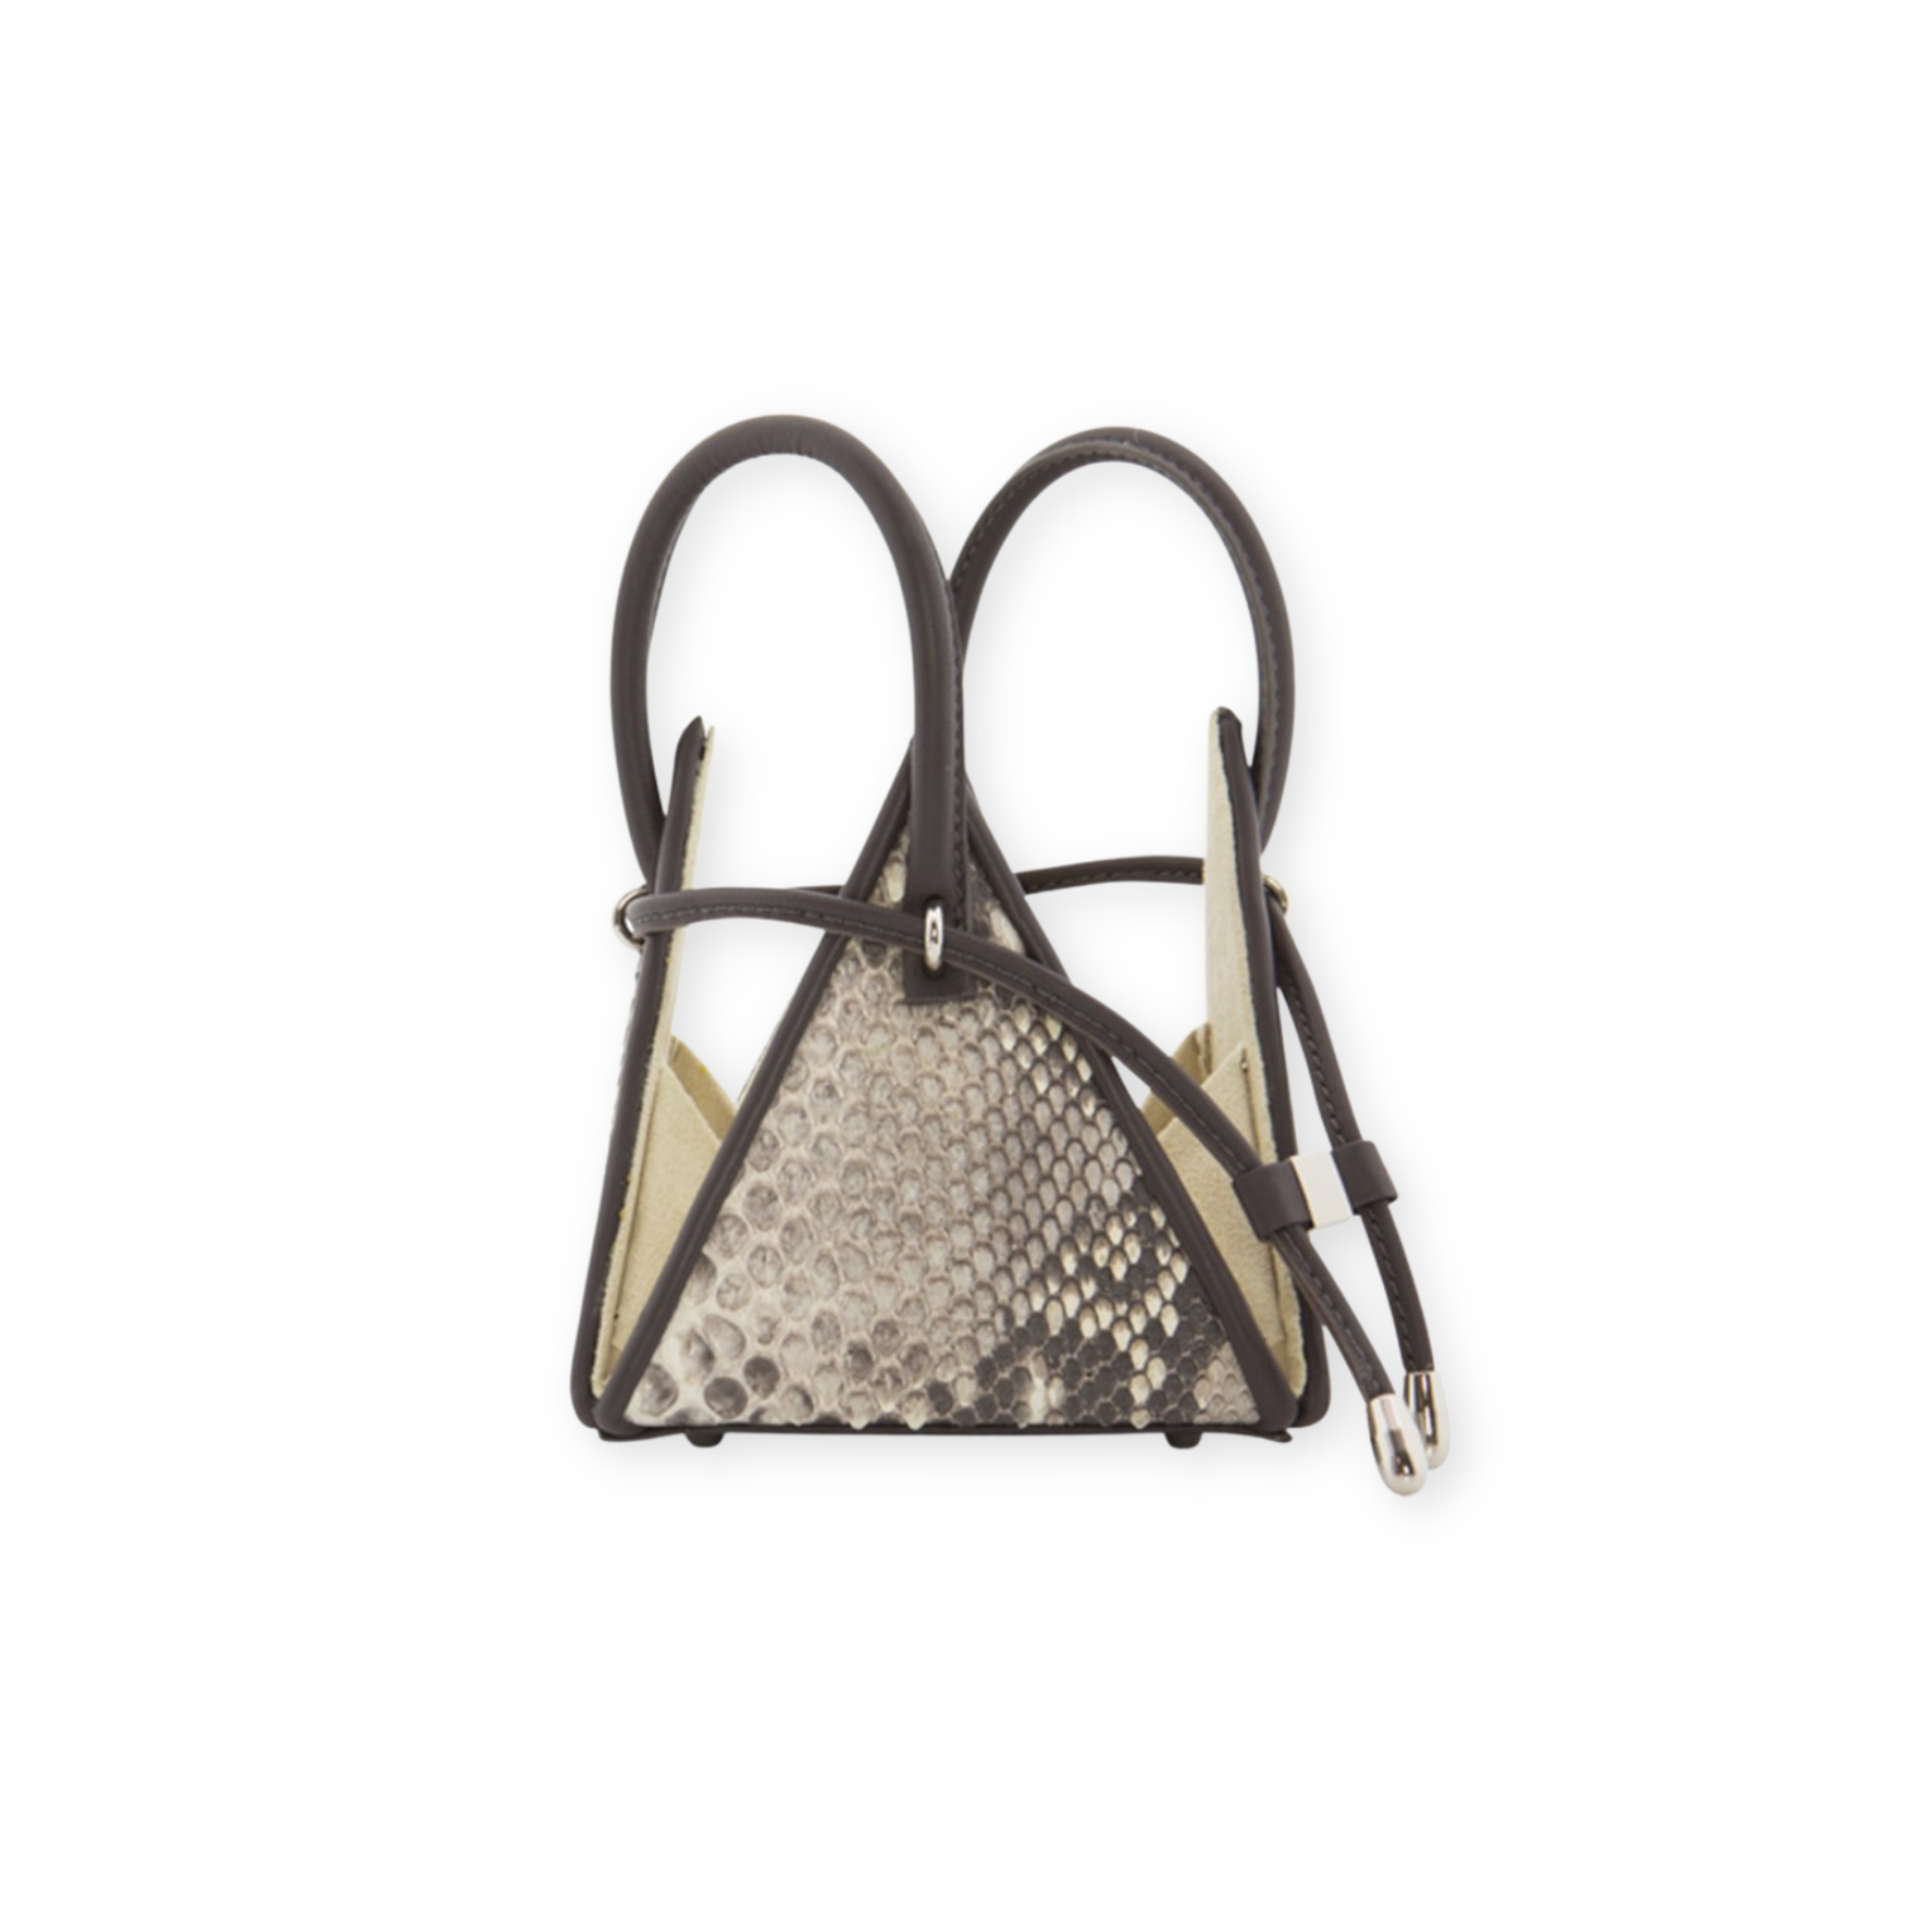 Buy now the Exotic LIA Mini bag inspired by the geometric shapes of our designer's birth city Barcelona, and its world known artist, Antonio Gaudí, architect of the world wonder La Sagrada Familia. The Exotic Lia Python Natural Mini bag has a unique and functional pyramidal design able to fit all your essentials. 